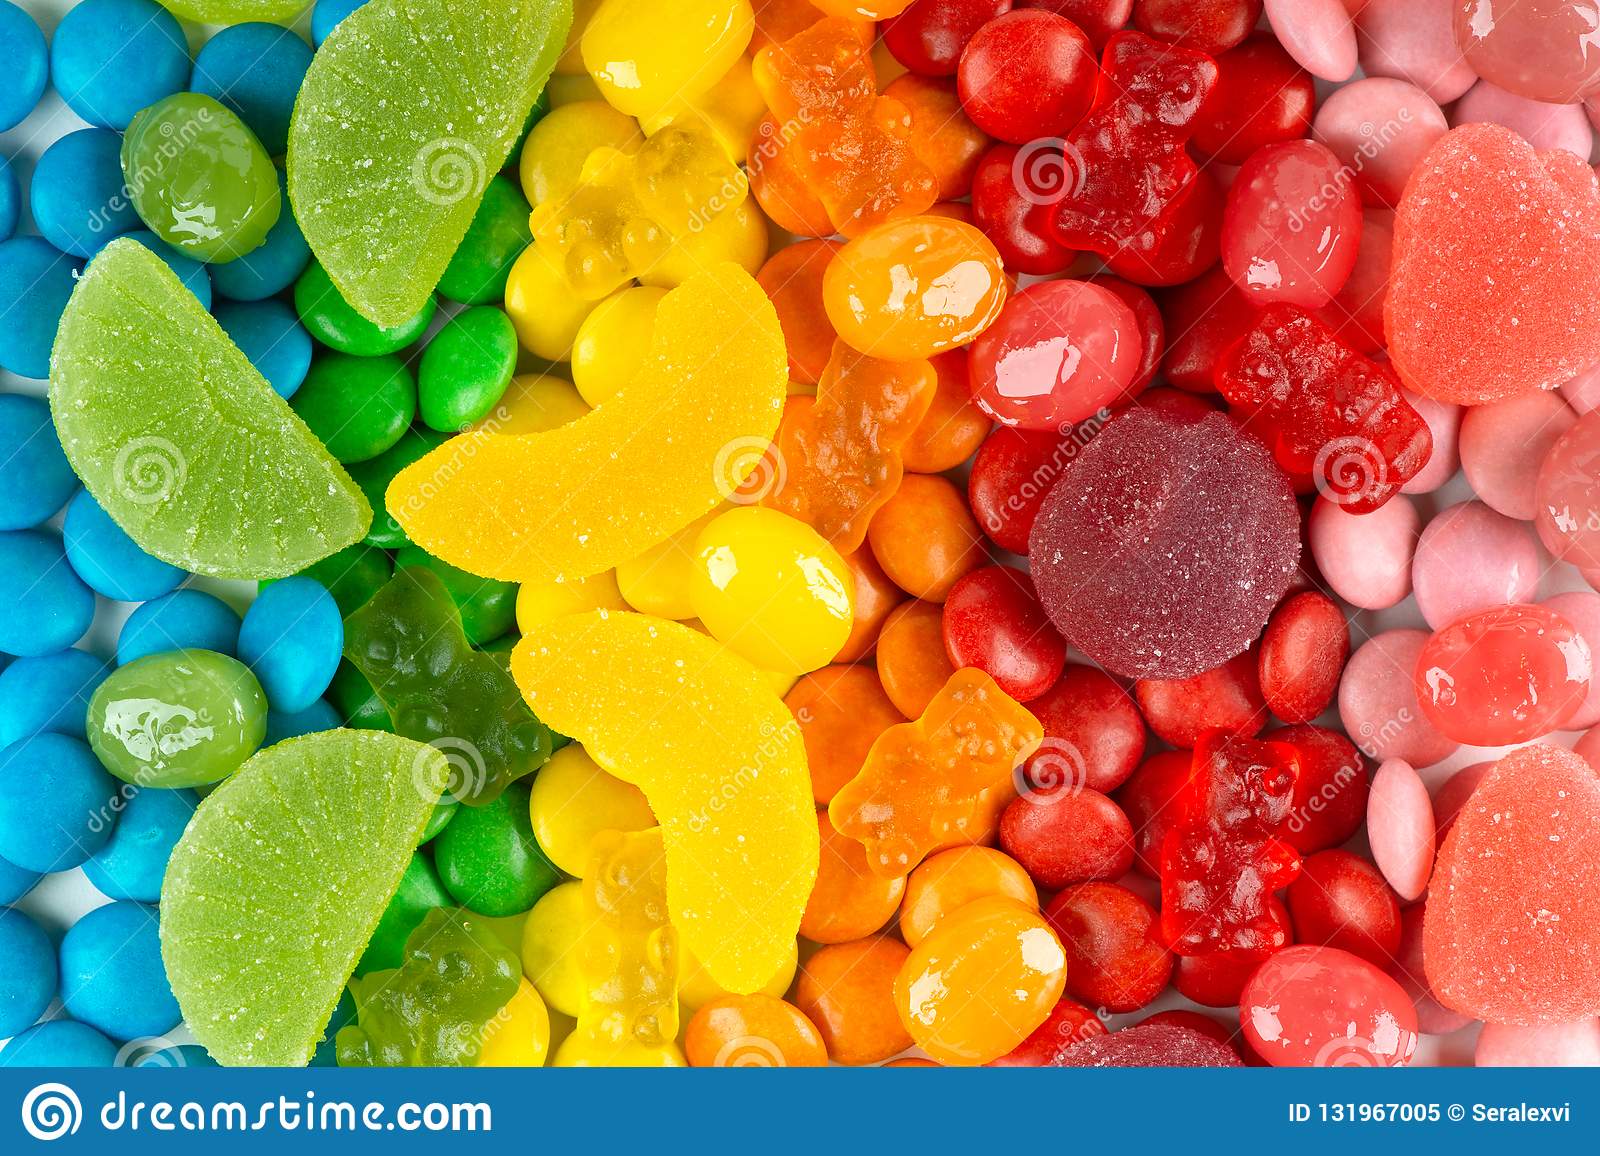 background-mixed-colorful-candies-color-sweets-texture-131967005.jpg